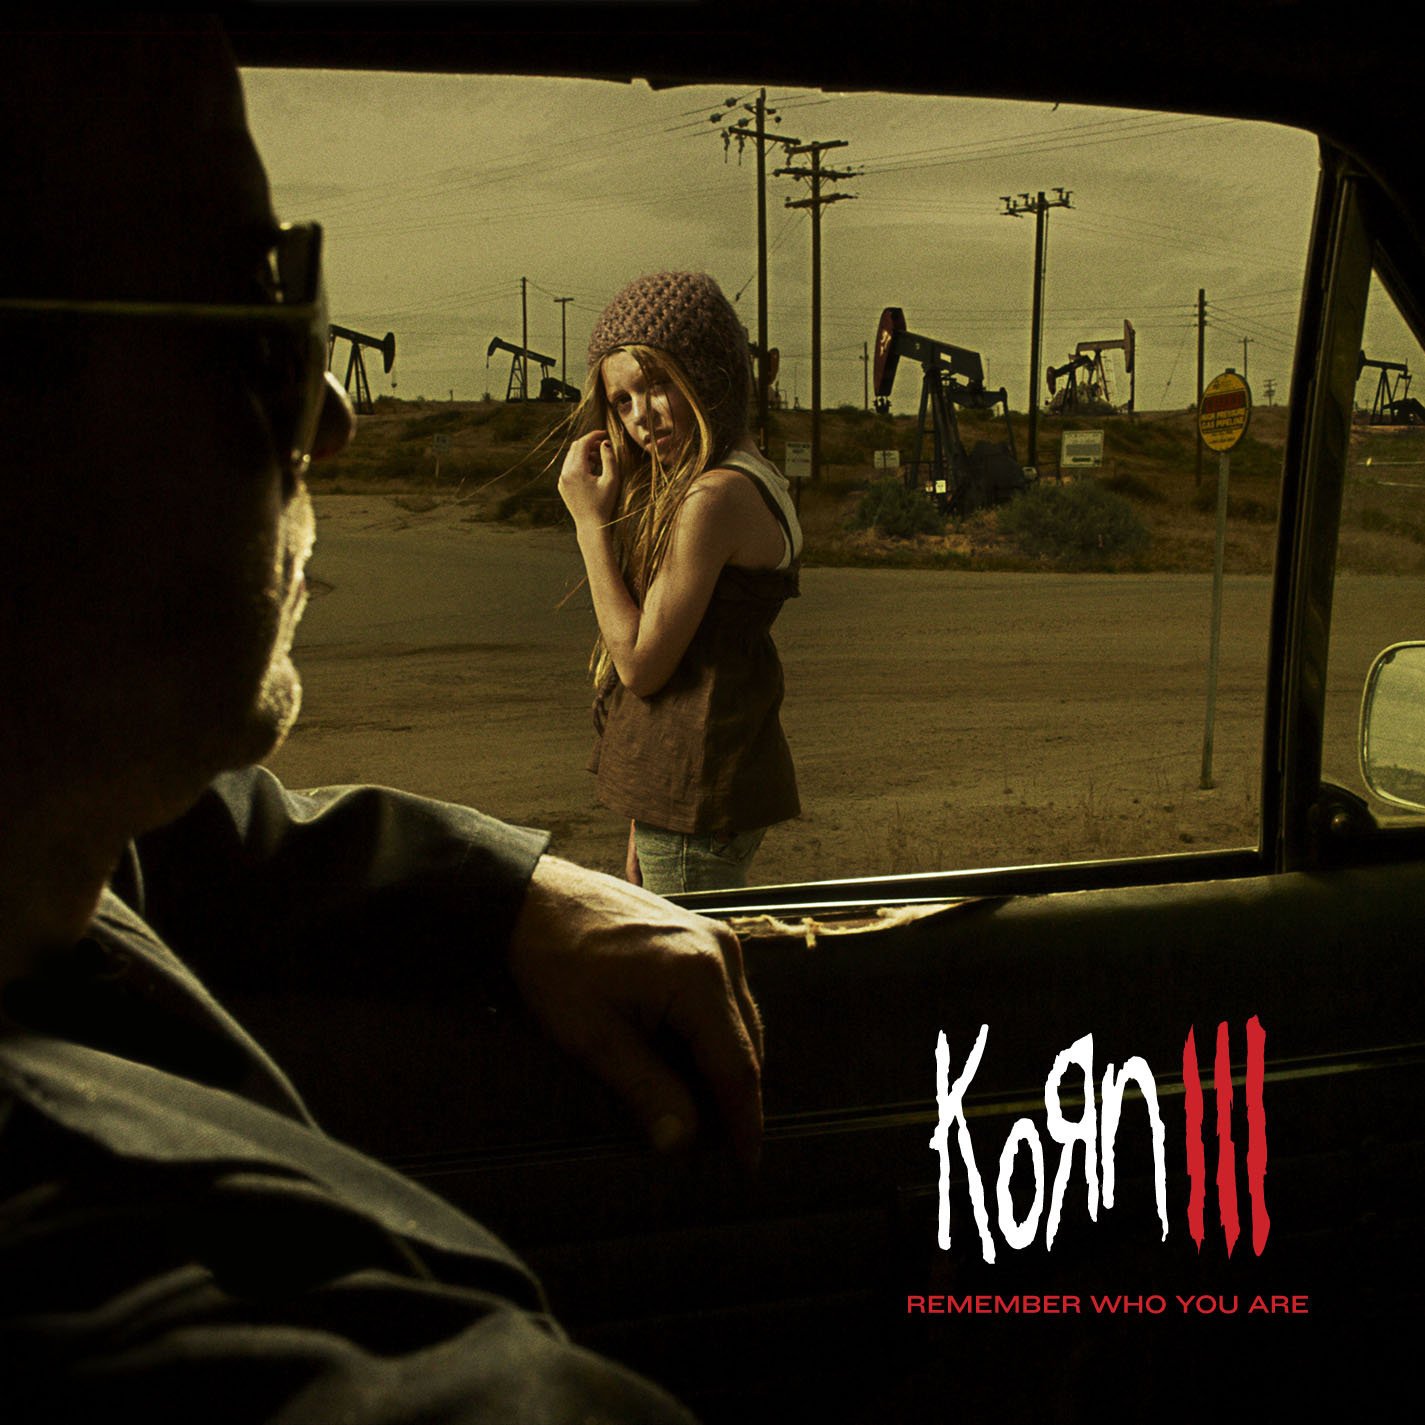 Episode 392: Korn III - Remember Who You Are by Korn